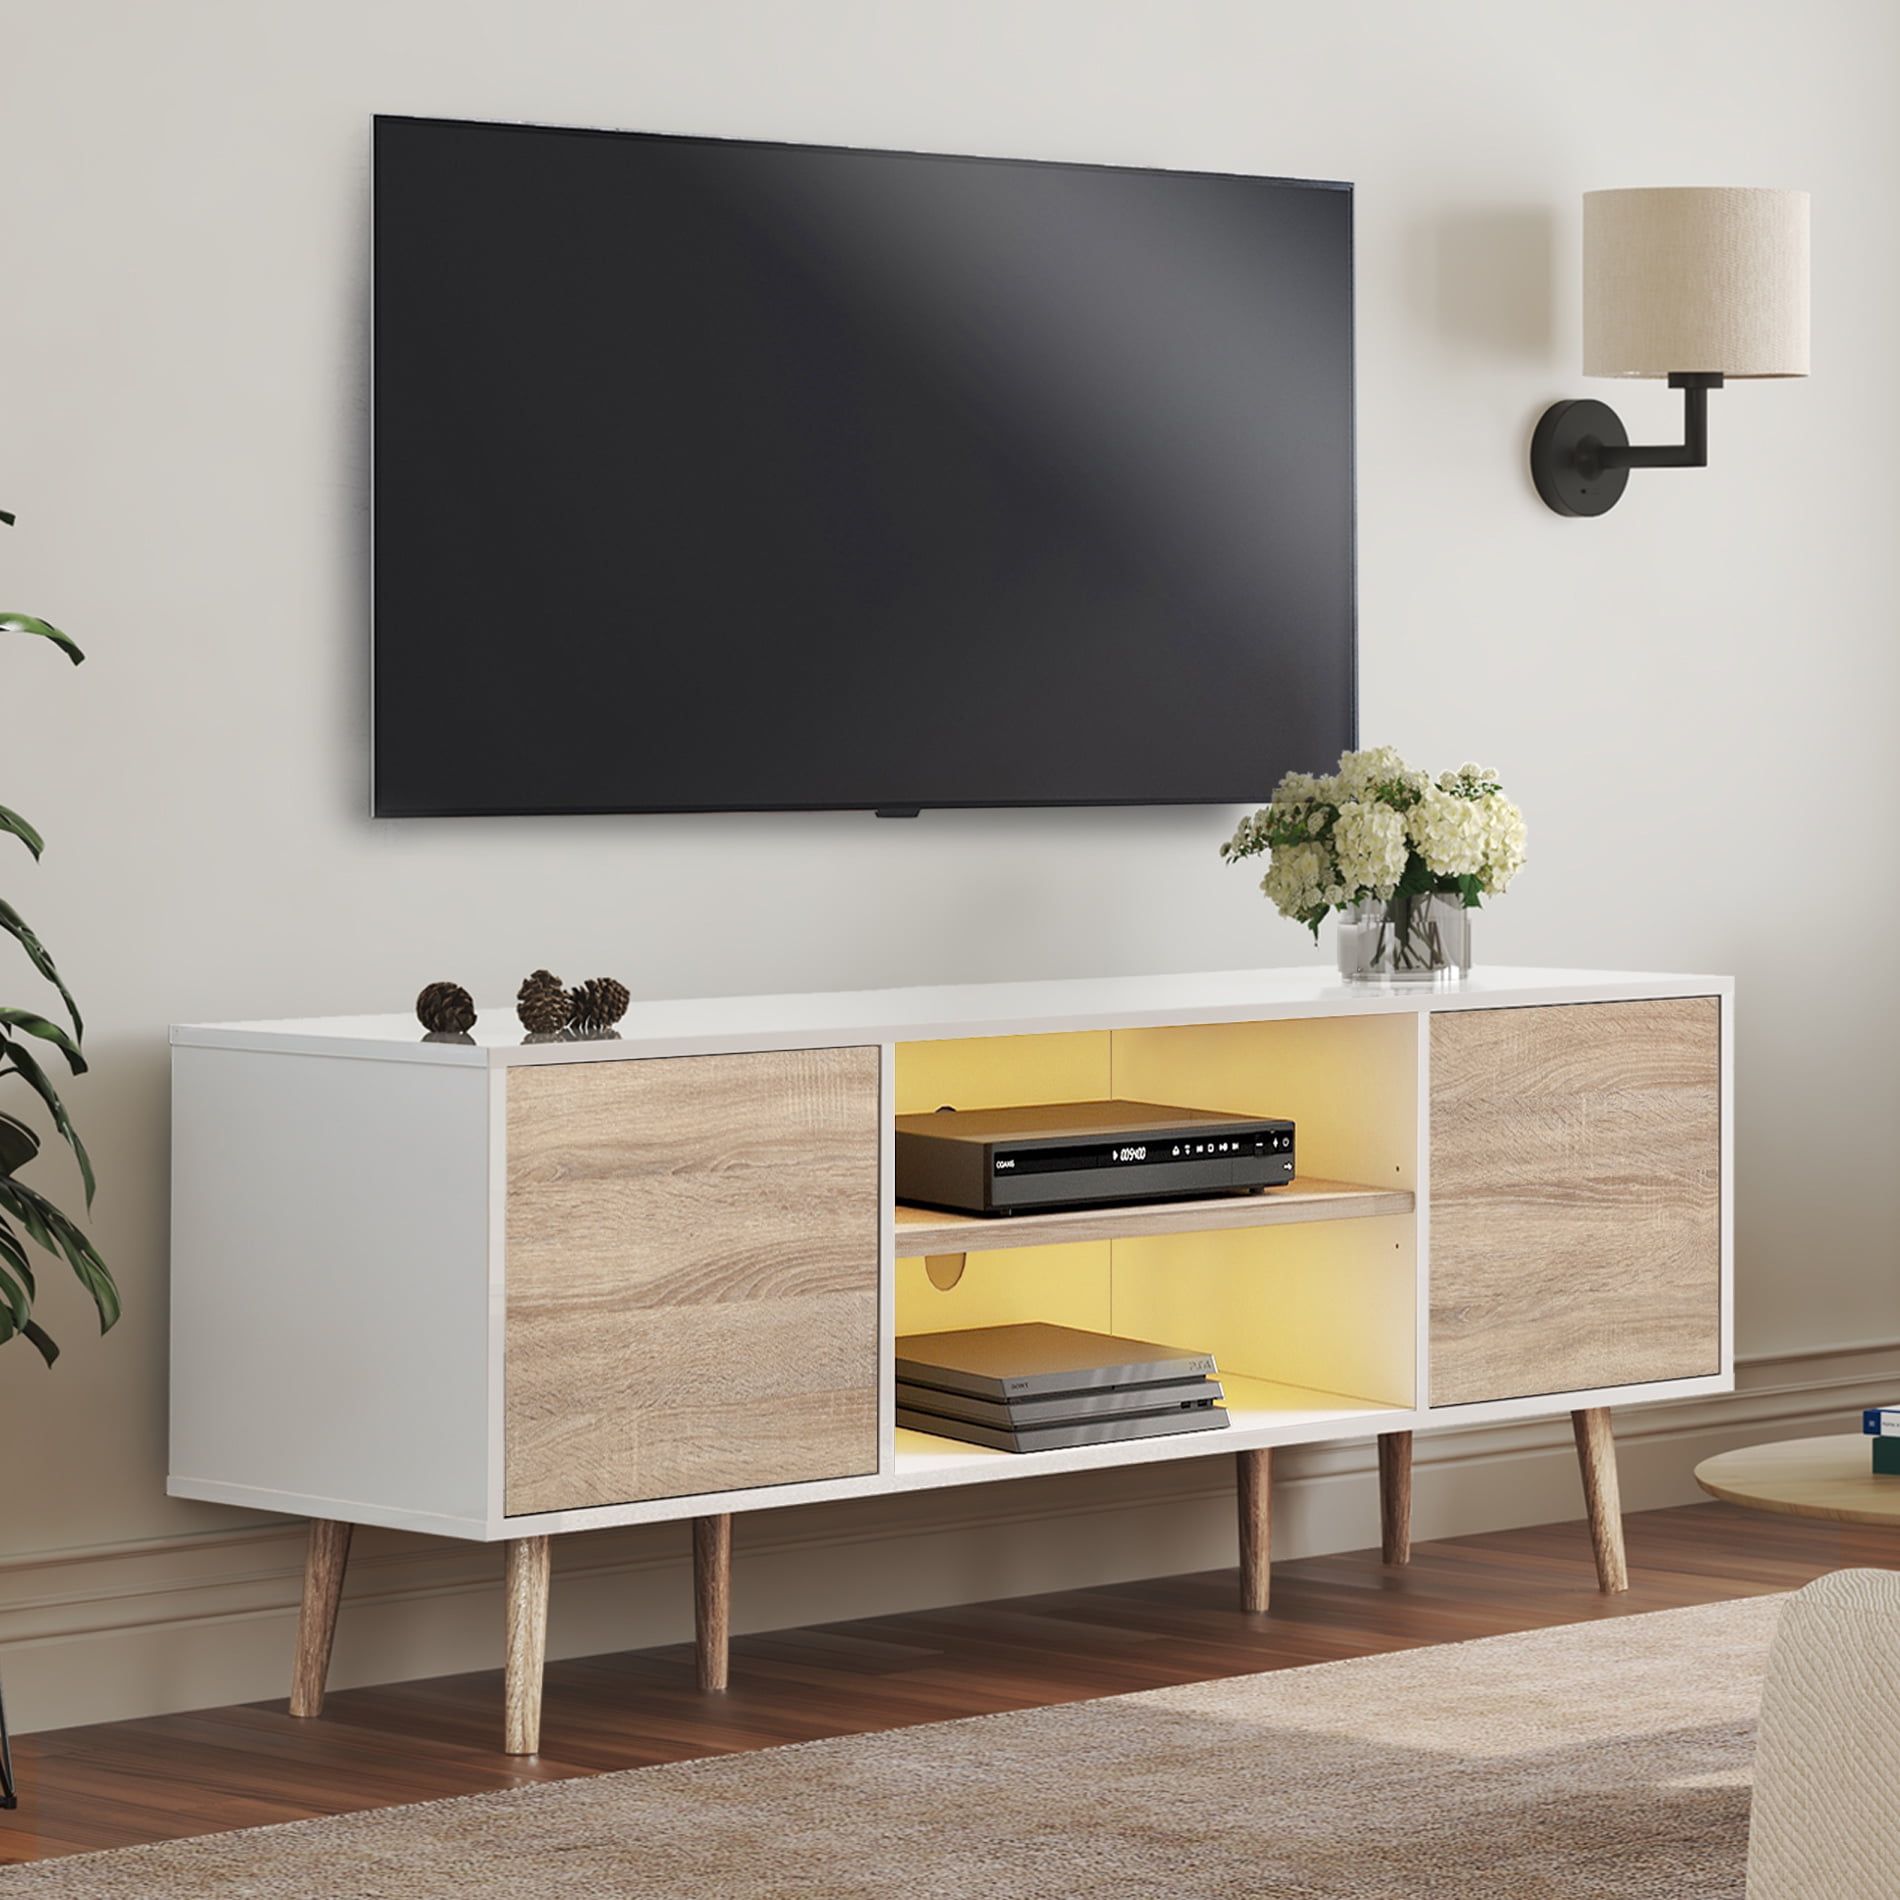 Wampat Led Mid Century Modern Tv Stand For Tvs Up To 60 Inch Flat Screen  Wood Tv Console Media Cabinet With Storage, Entertainment Center In White  And Oak For Living Room Bedroom, 55 Throughout Mid Century Entertainment Centers (View 6 of 15)